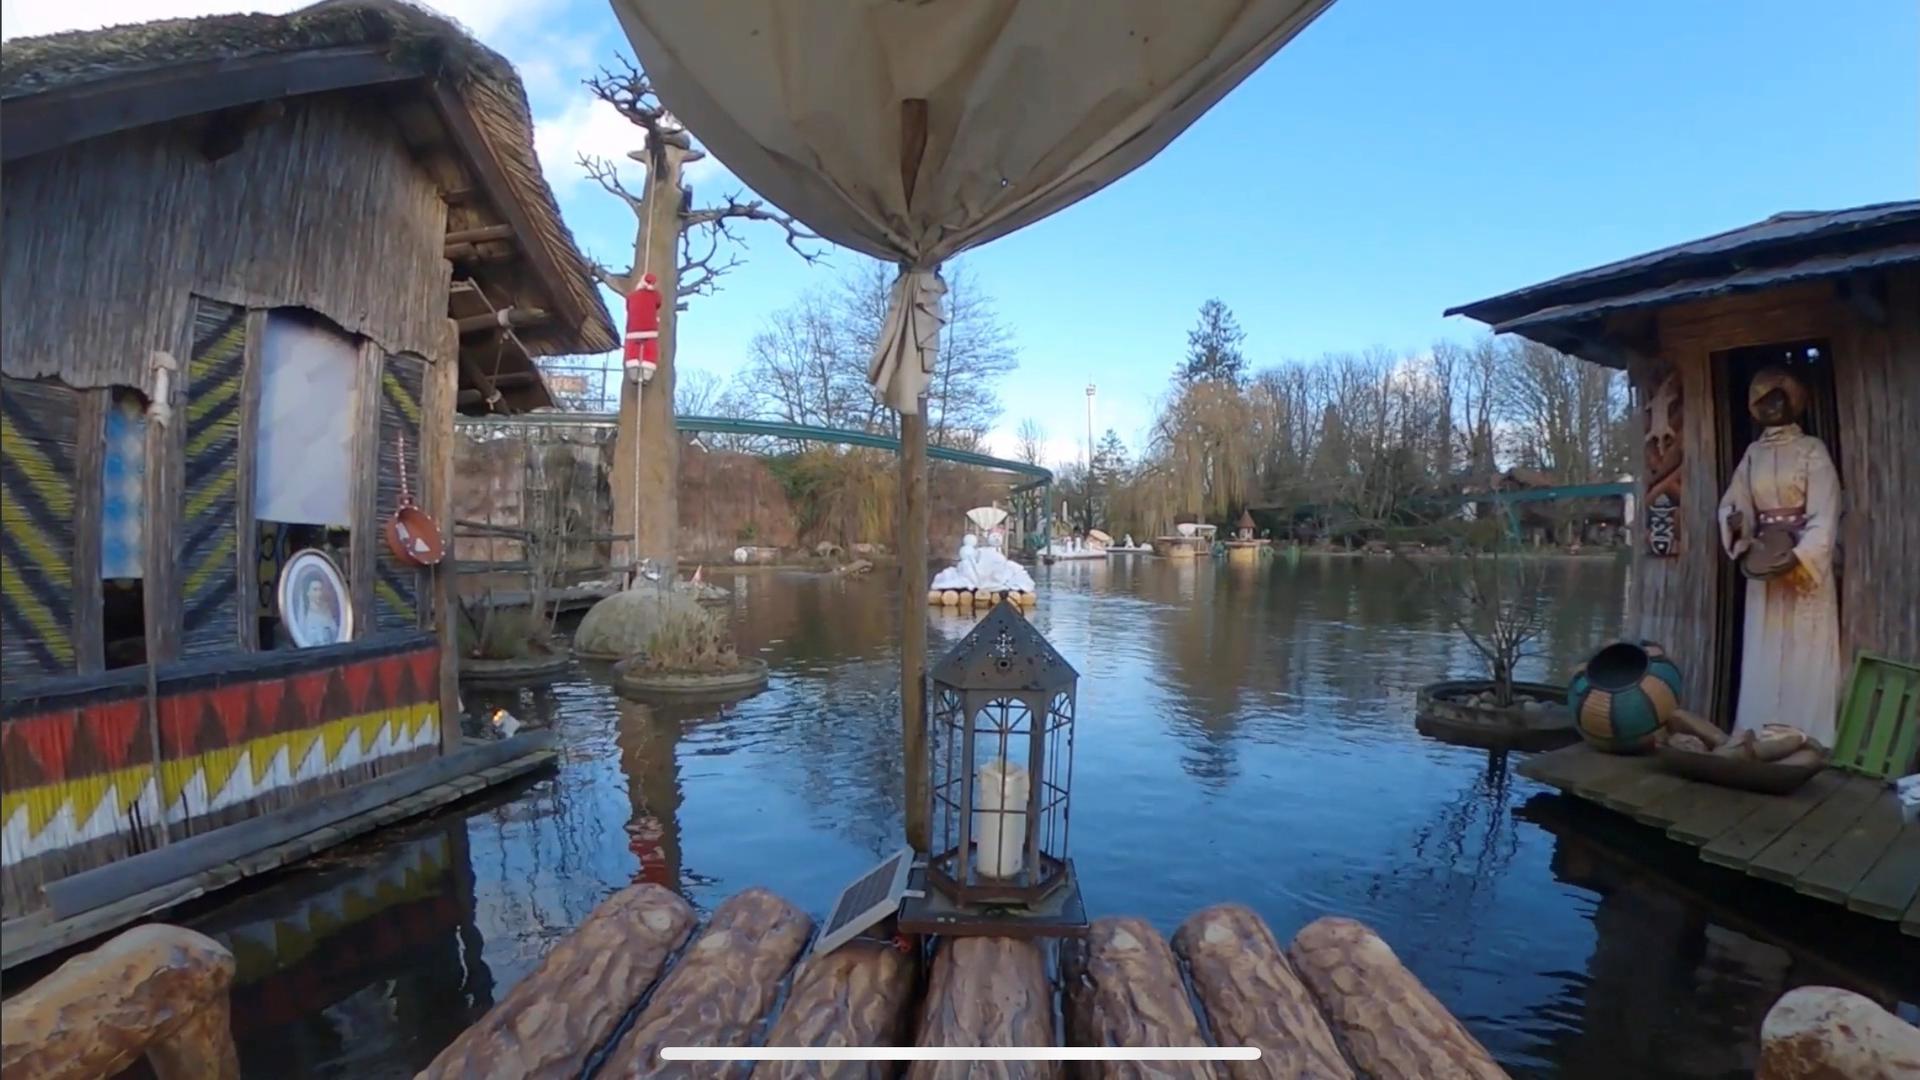 A photo of Empress Sisi points to the future: in the Europa-Park farewell video, a portrait of the famous and magical Austrian empress is leaning against an African hut.  Now fans are speculating on the role it will play in the converted rafting area.